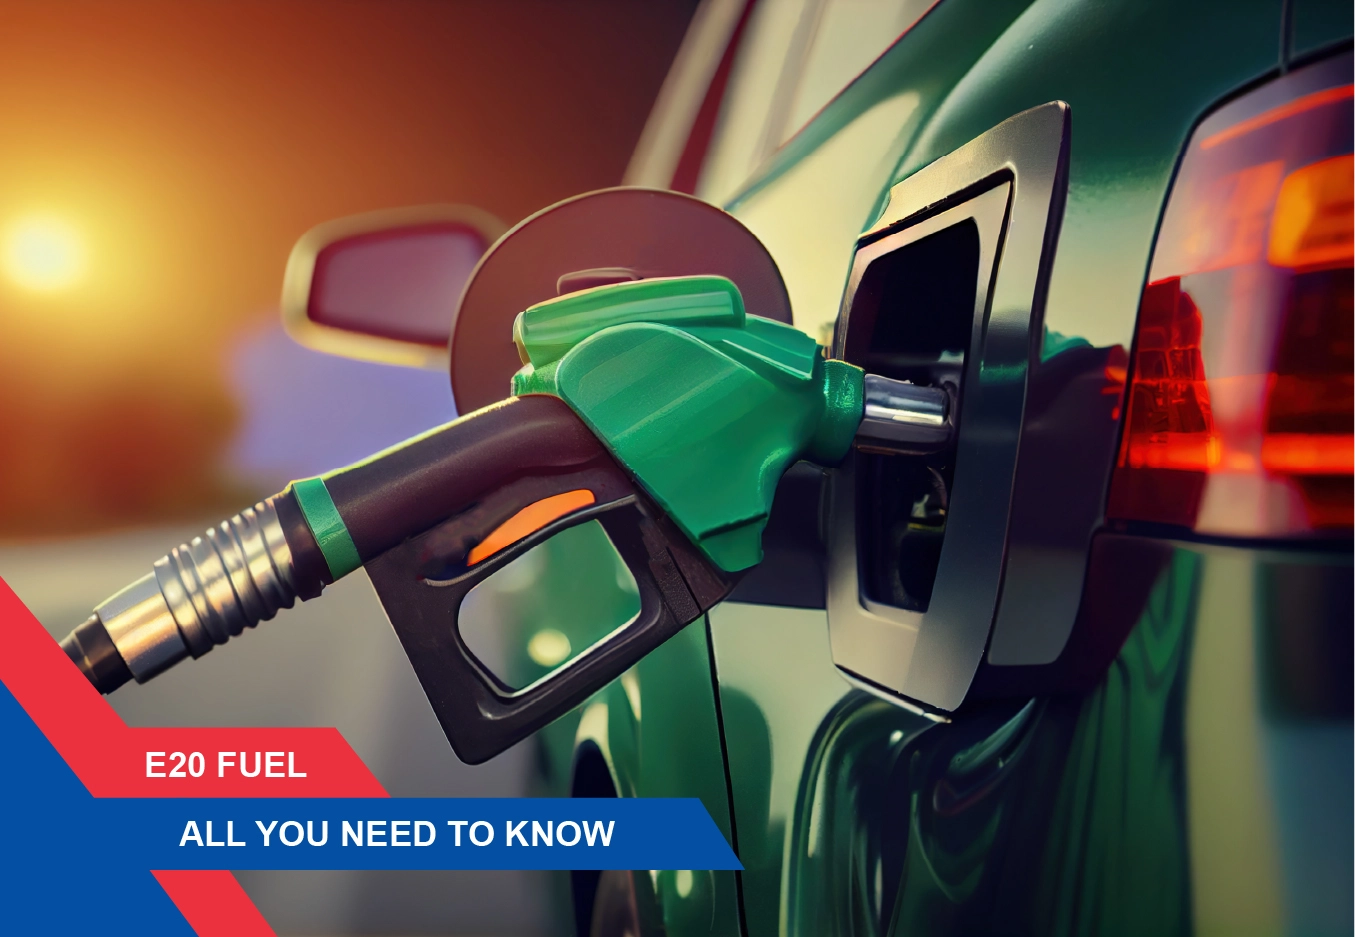 E20 Fuel: All You Need To Know